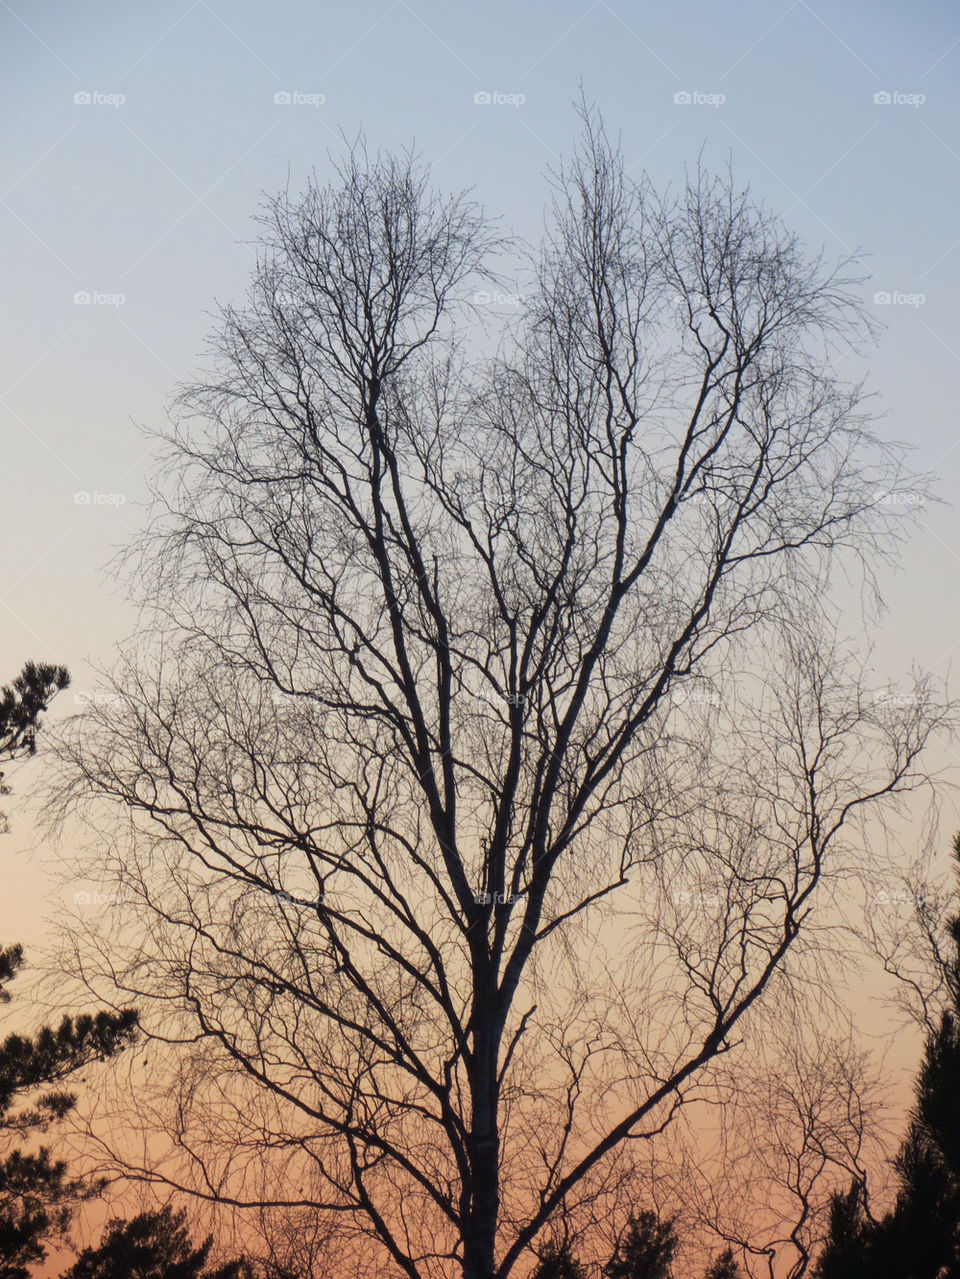 A tree in sunset